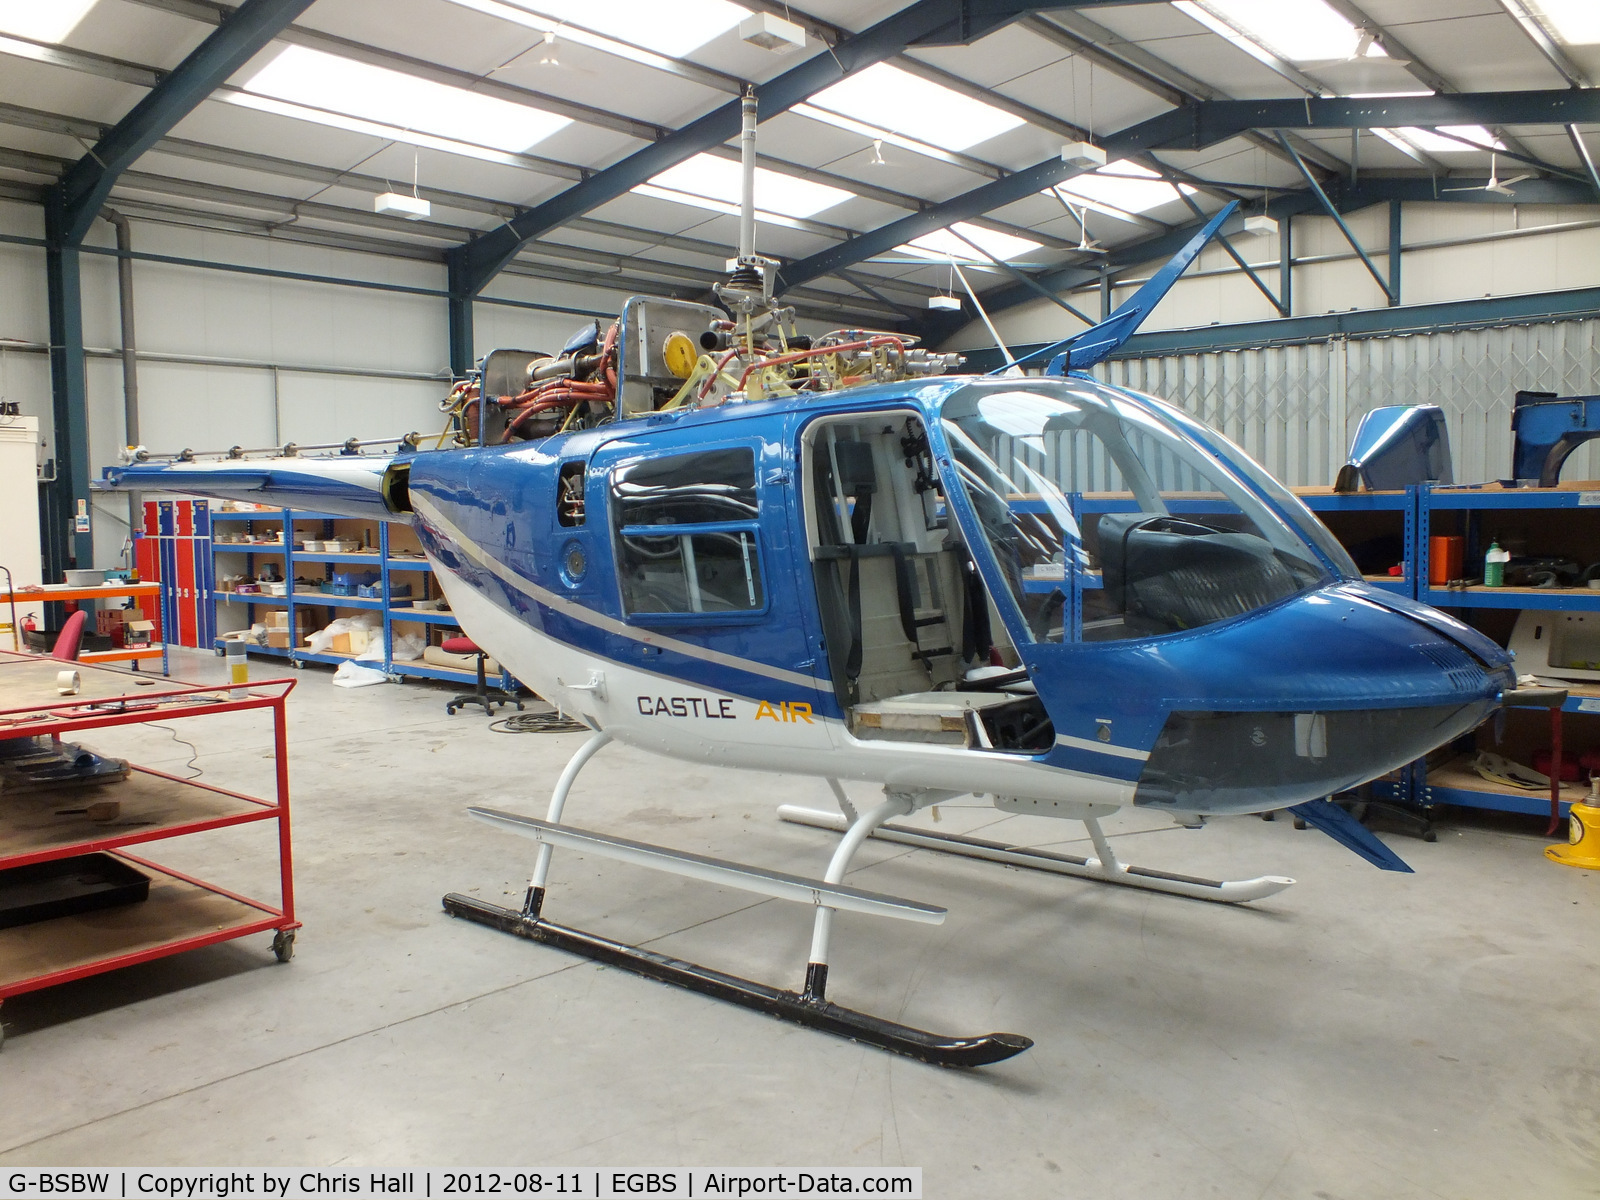 G-BSBW, 1982 Bell 206B JetRanger III C/N 3664, inside the Tiger Helicopter's Hangar at Shobdon Airfield, Herefordshire